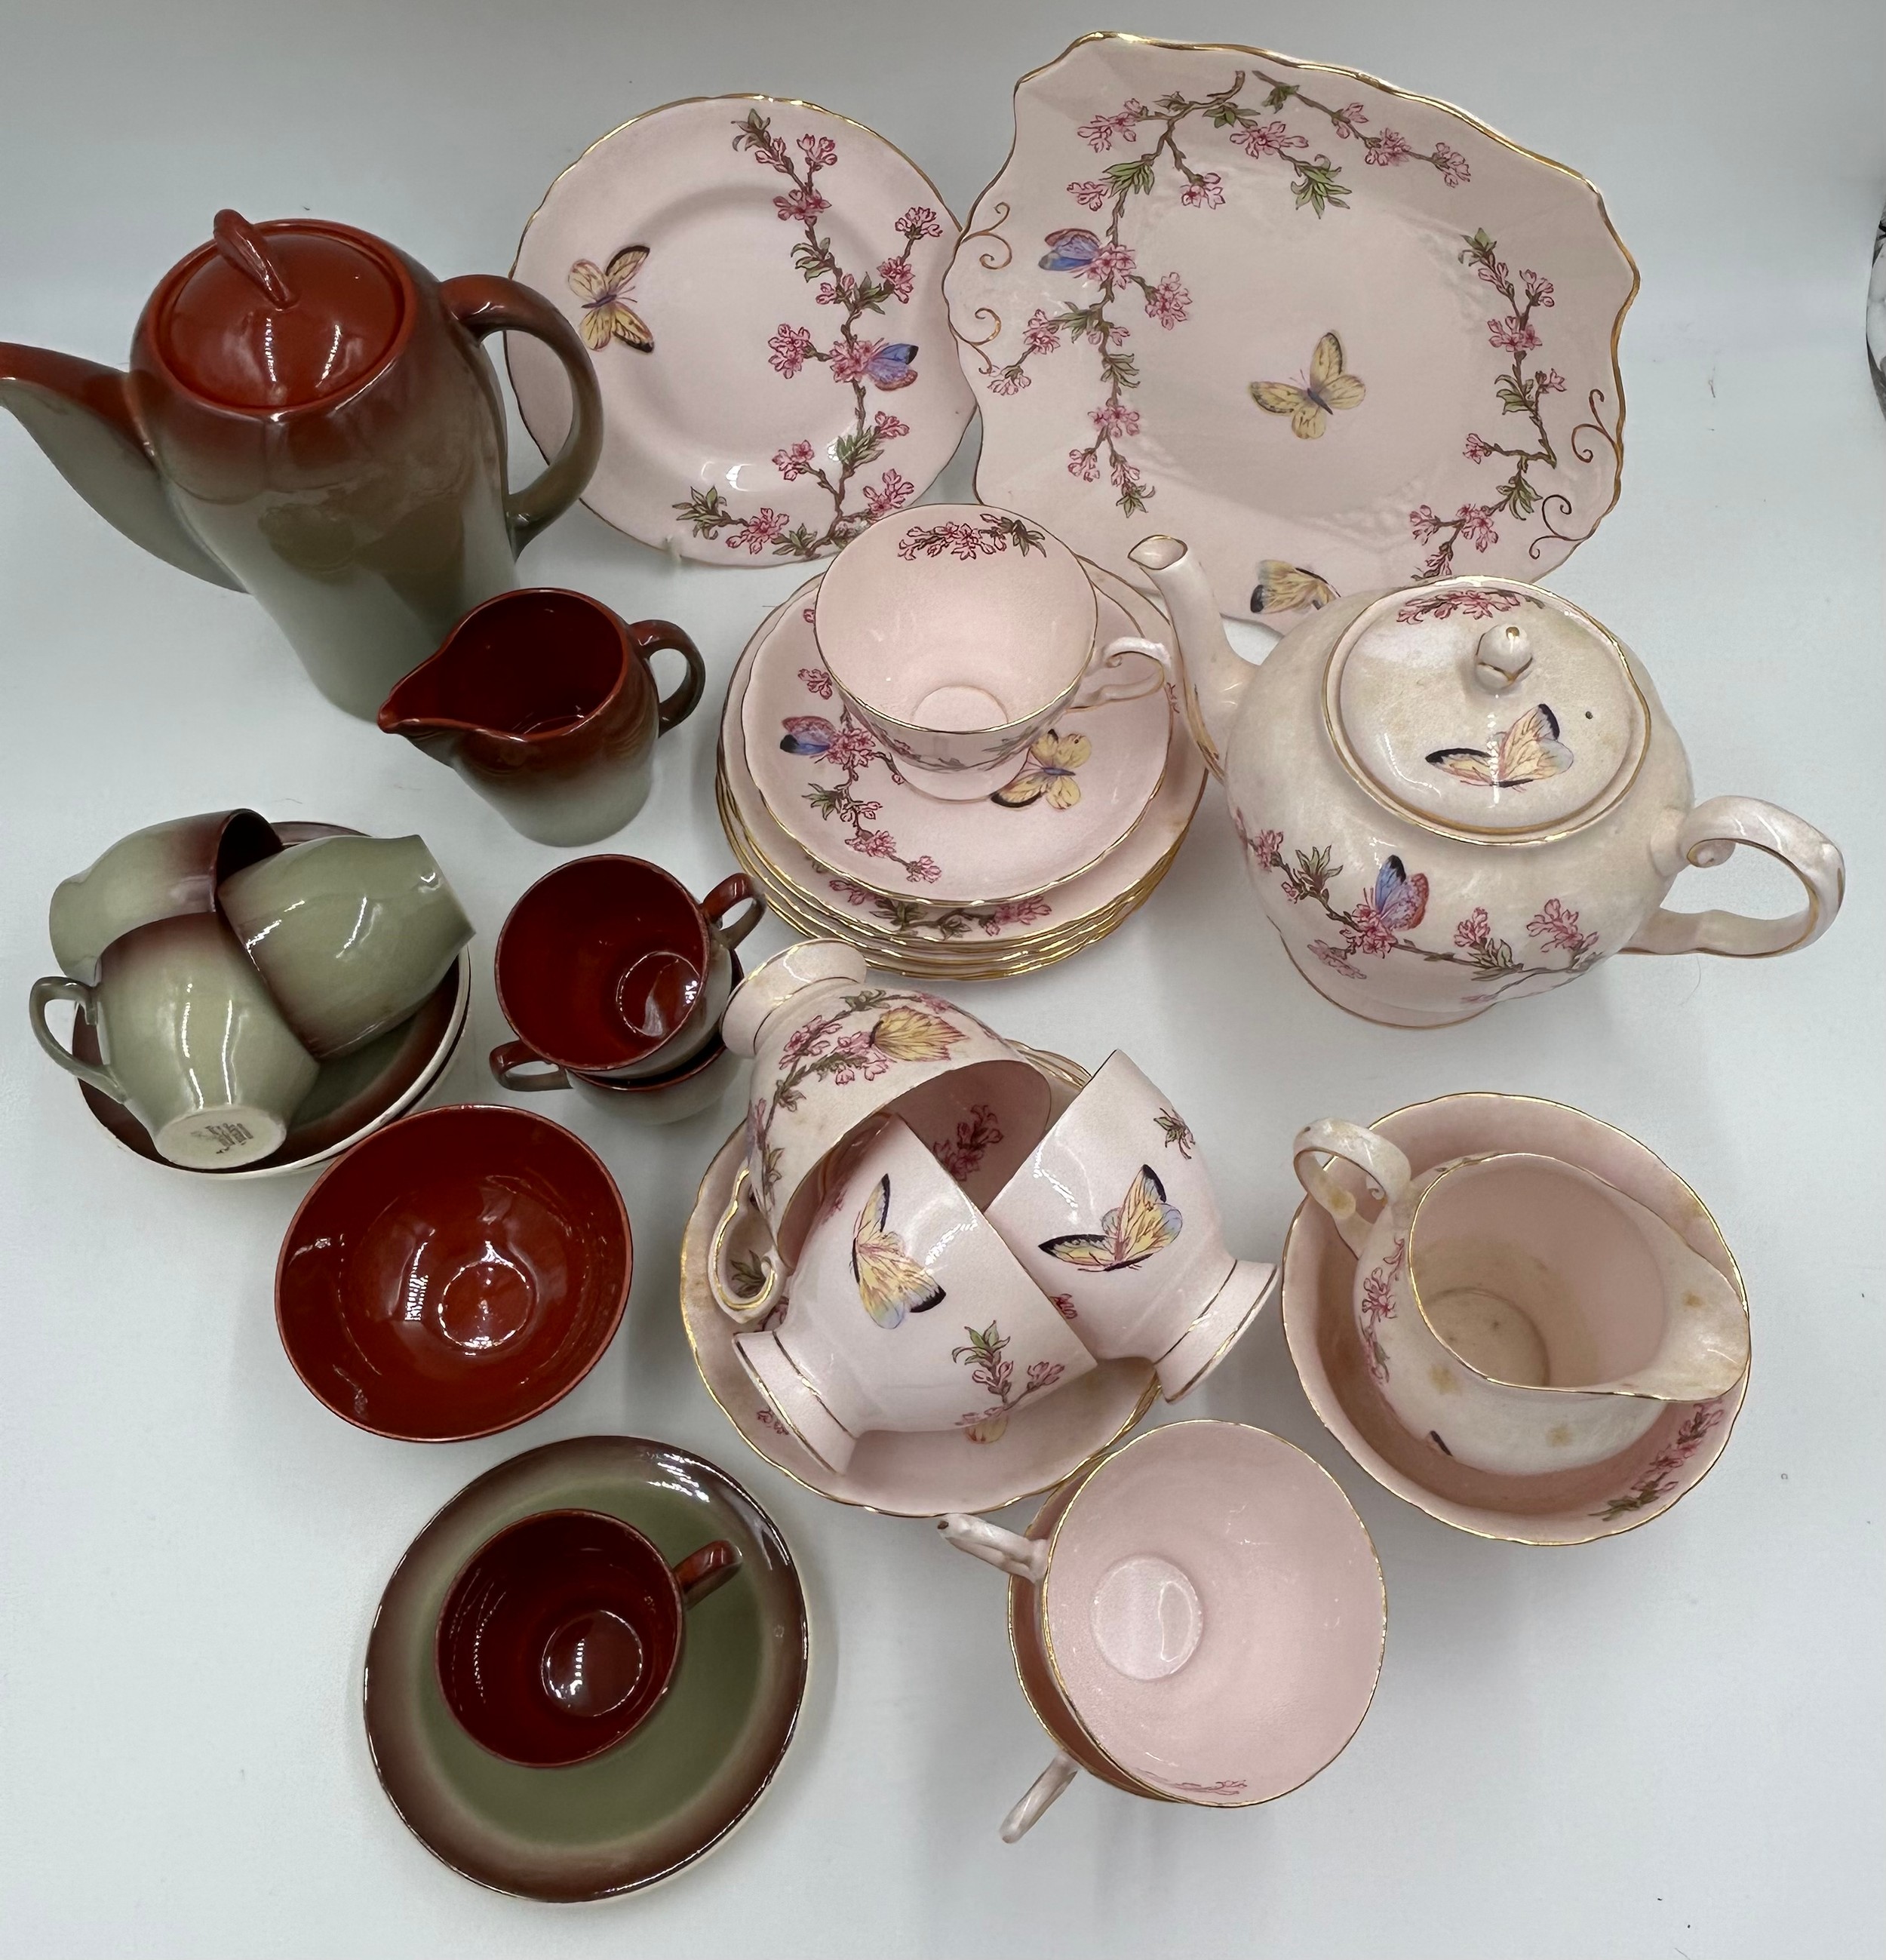 A pink Tuscan bone china tea service with blossom and butterfly pattern (teapot, milk, sugar, 6 x - Image 3 of 9